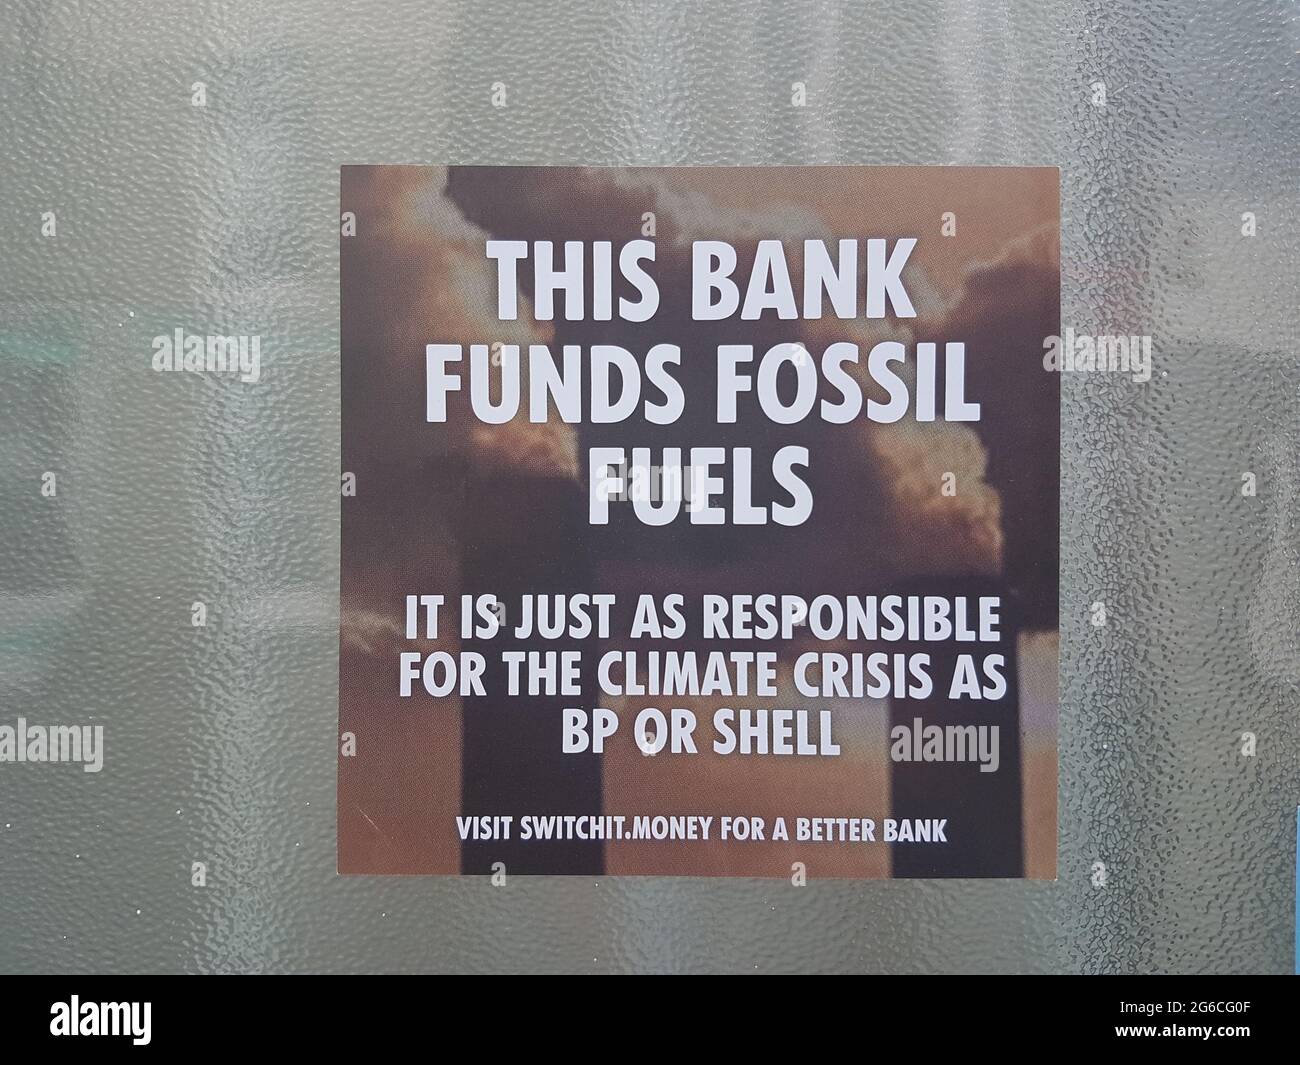 Woodbridge, Suffolk, UK July 05 2021: Extinction rebellion poster that has been put up on the walls of a Barclays bank claiming they fund climate cris Stock Photo